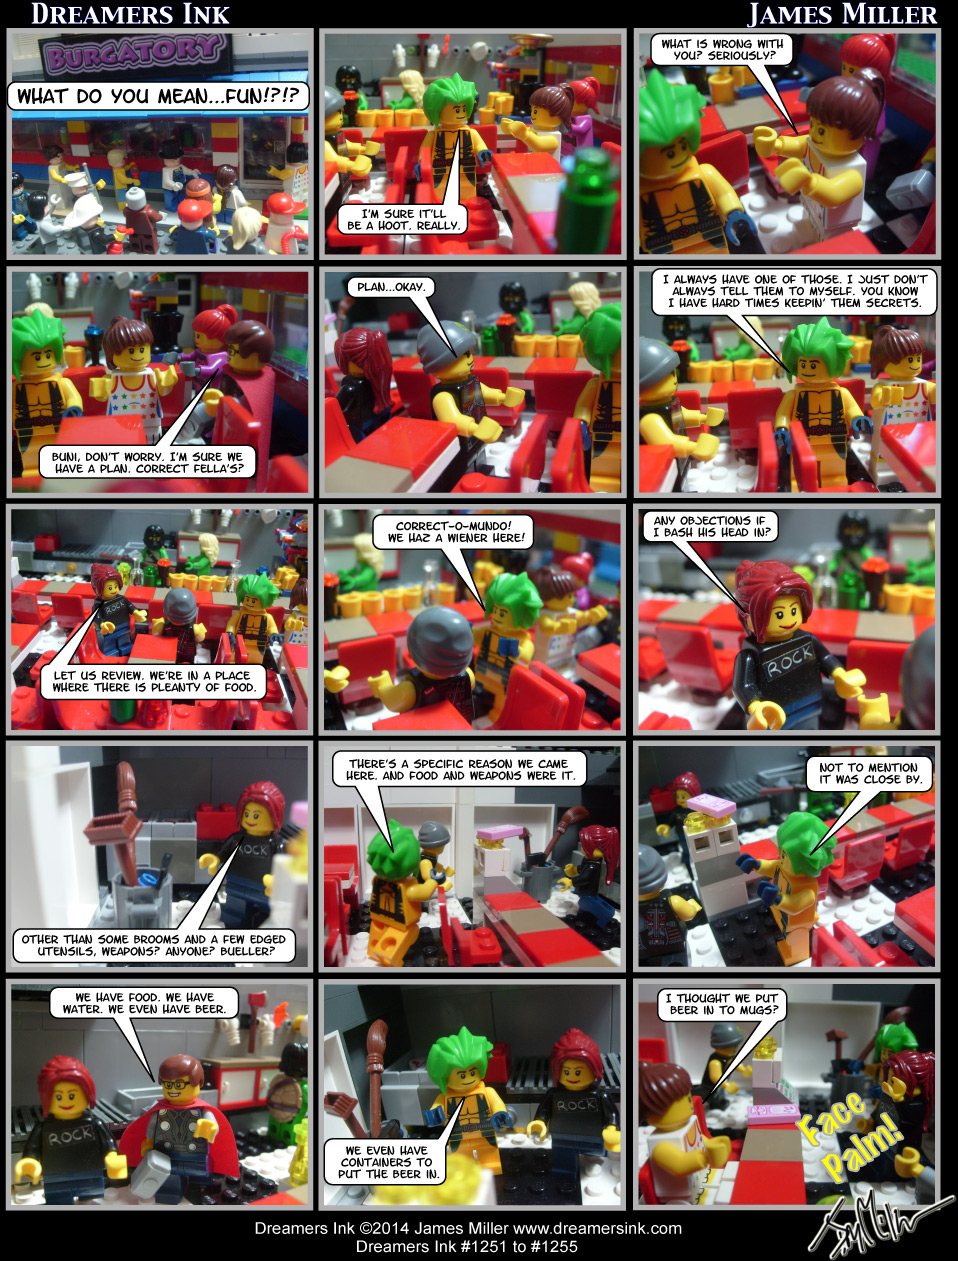 Strips #1251 To #1255